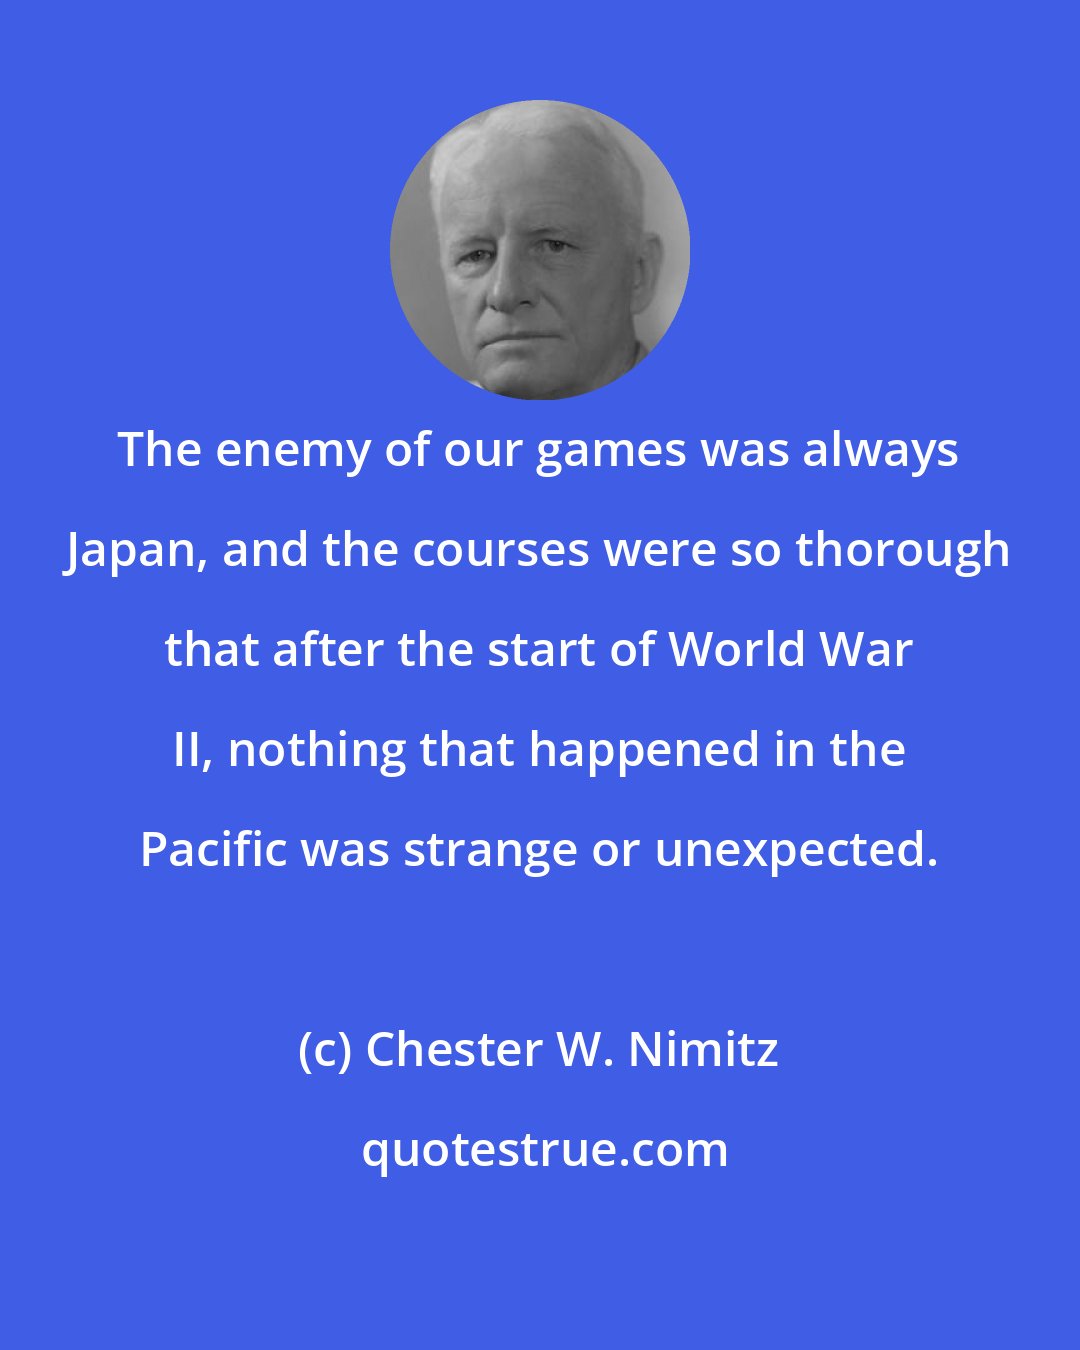 Chester W. Nimitz: The enemy of our games was always Japan, and the courses were so thorough that after the start of World War II, nothing that happened in the Pacific was strange or unexpected.